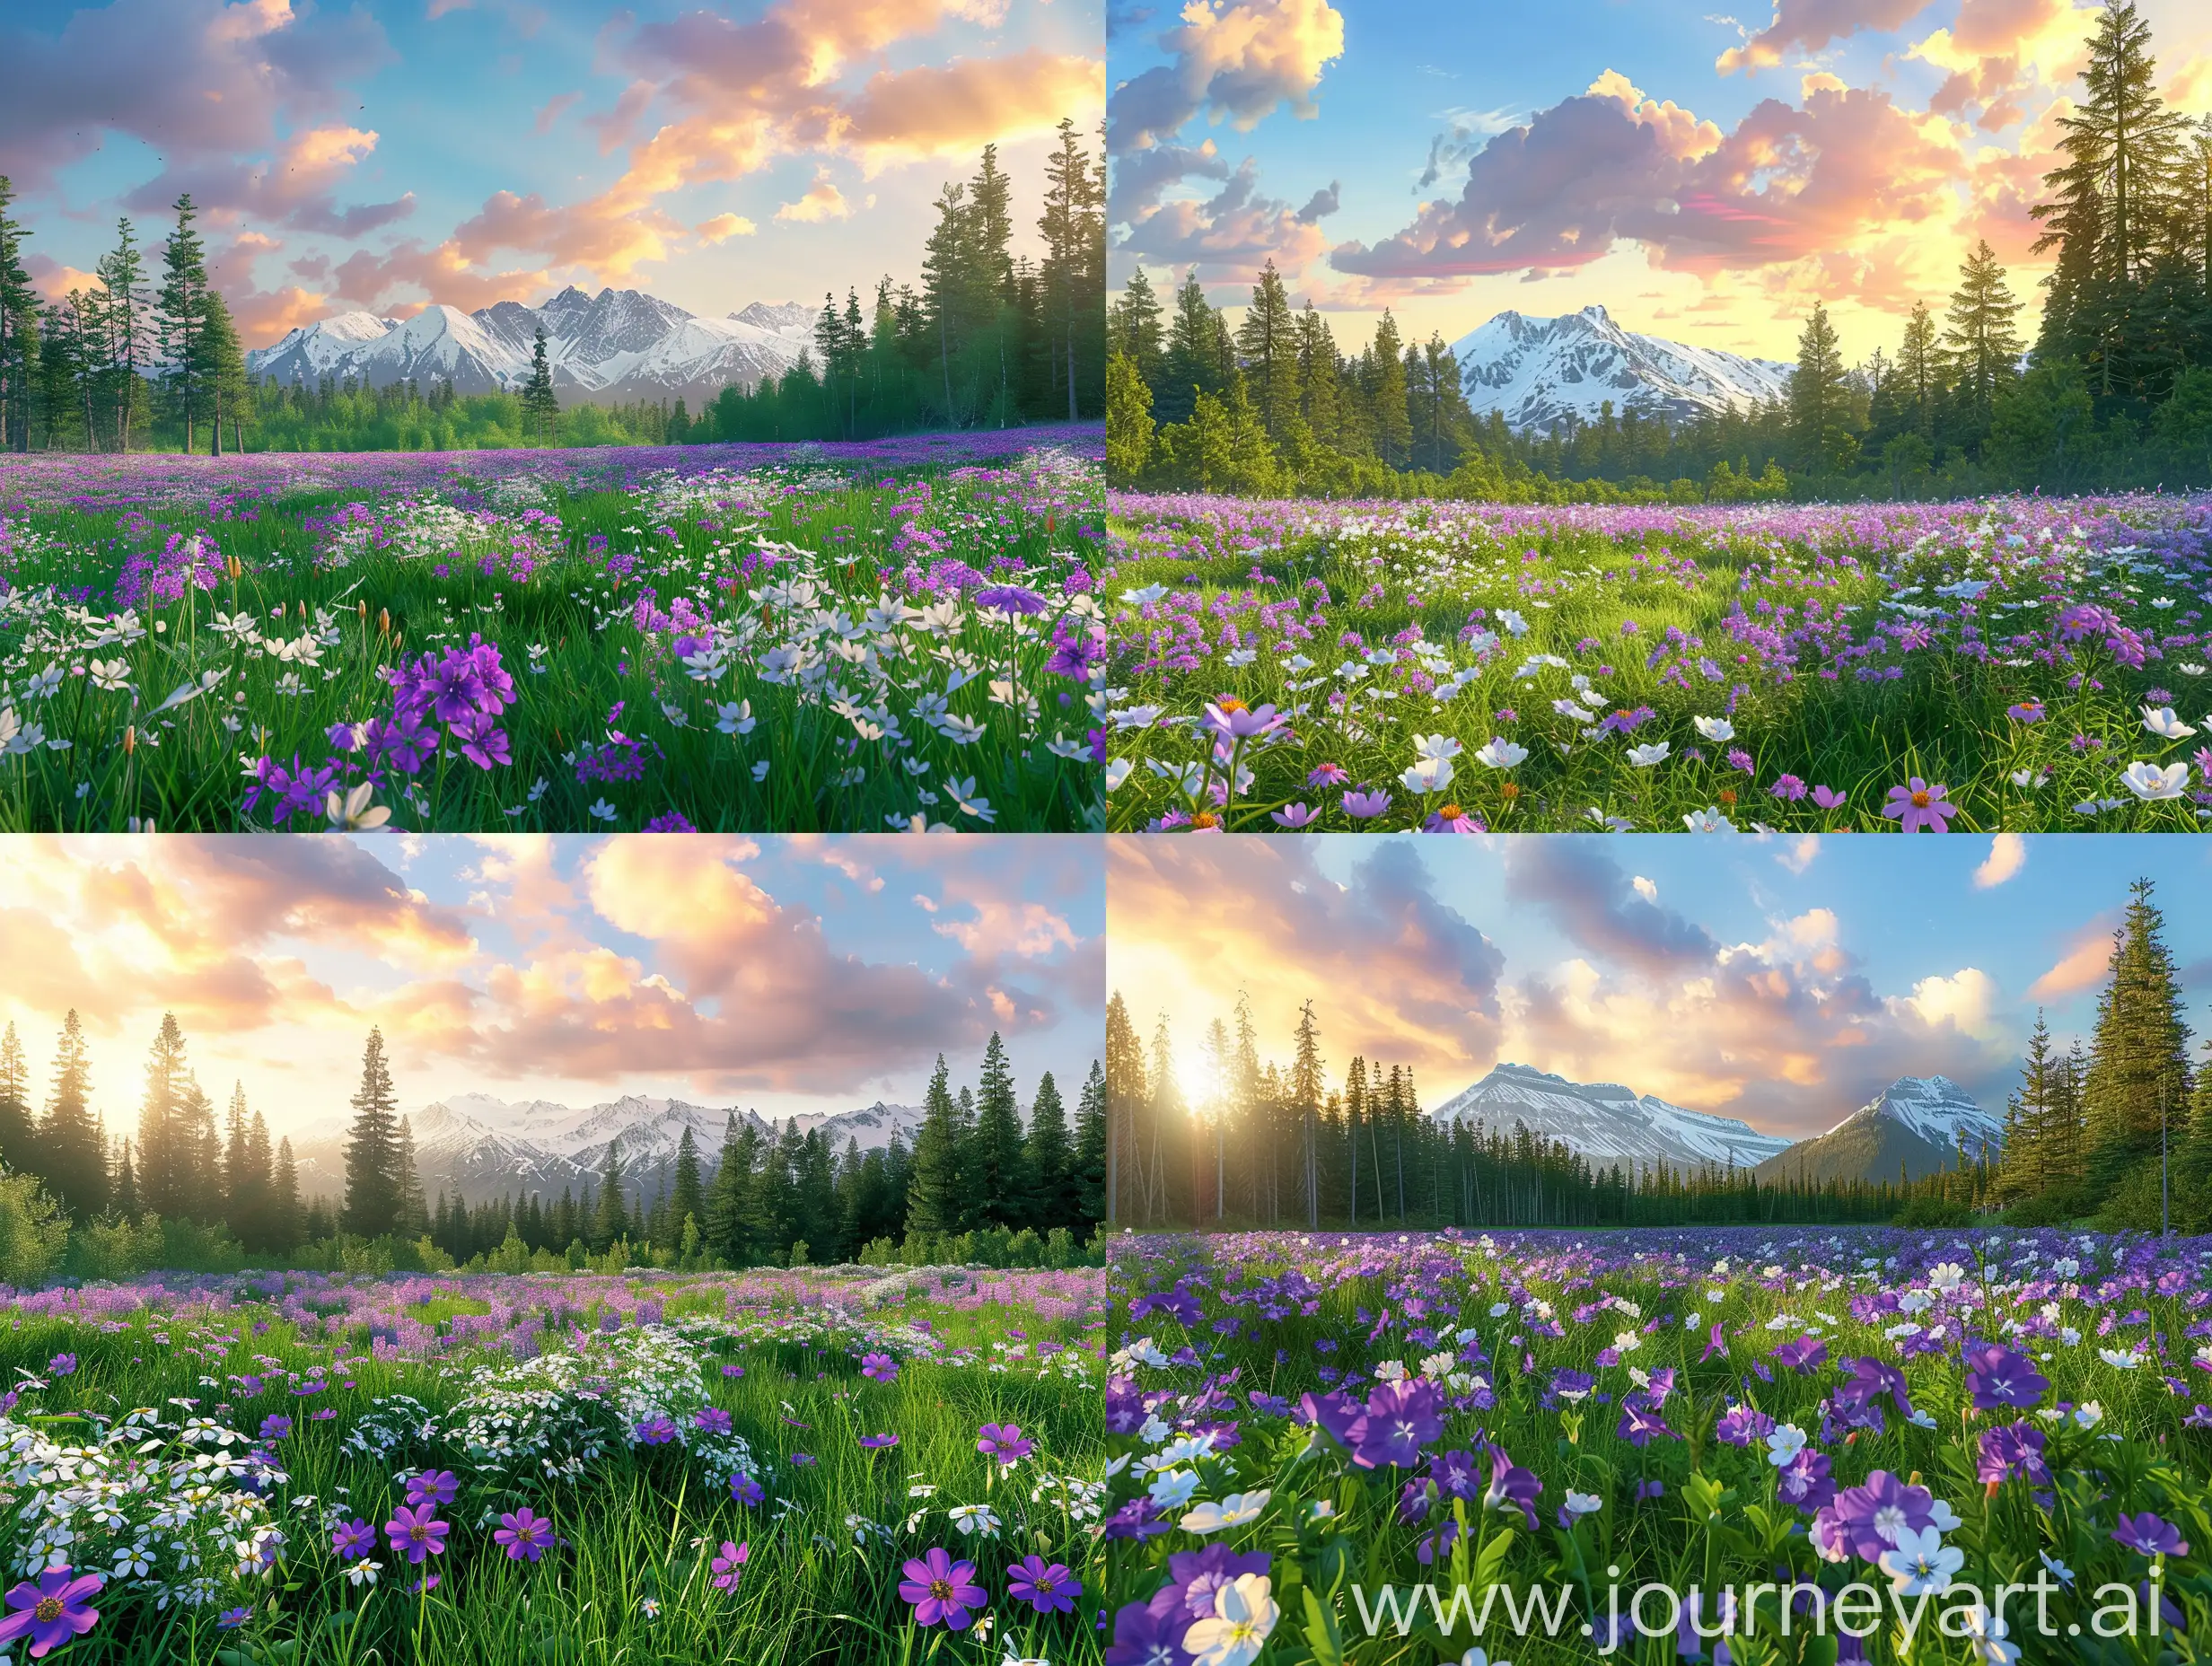 Vibrant-Meadow-with-Majestic-Mountains-and-Forest-in-Spring-Sunrise